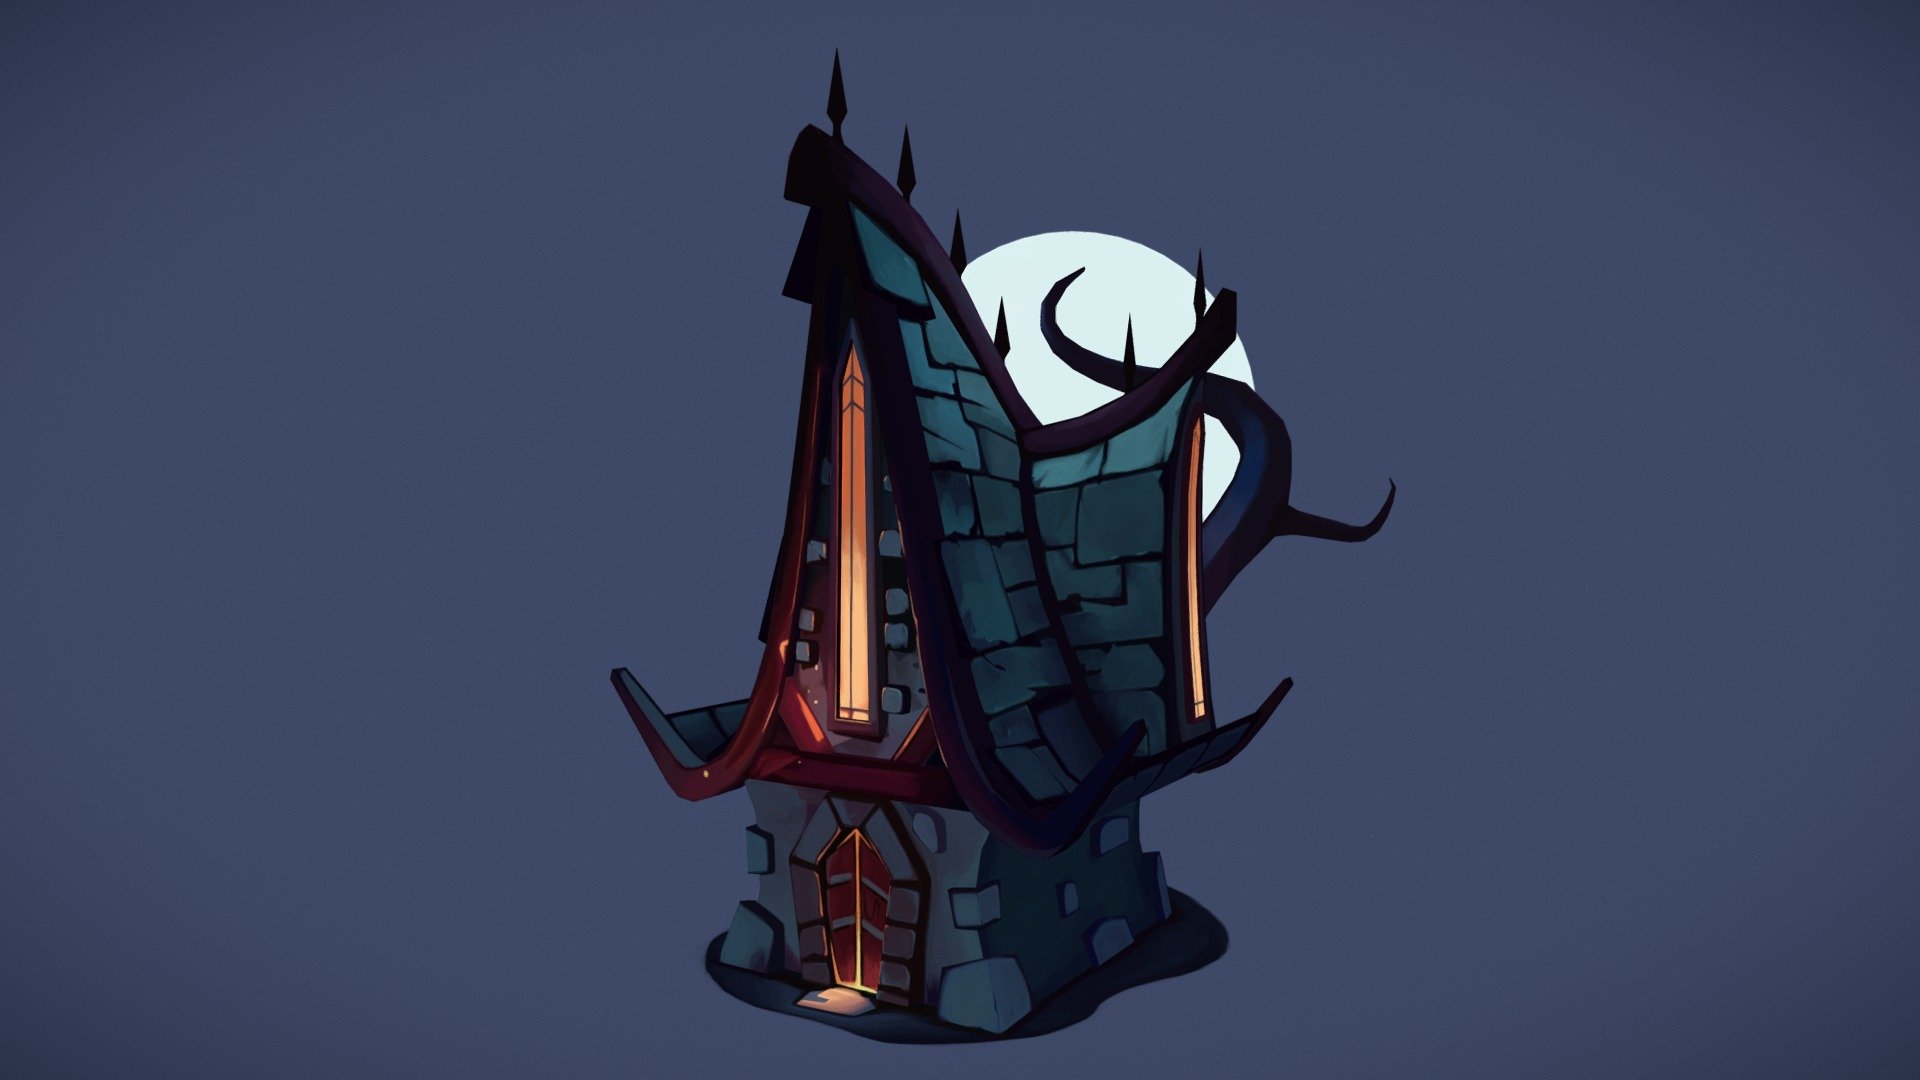 Stylised, handpainted Spooky House modelled in Maya and textured in Substance 3D Painter. Thank you to Samuele Bandini for letting me use his concept art as reference :) - Spooky House - 3D model by Toby Tonks (@tobytonks) 3d model